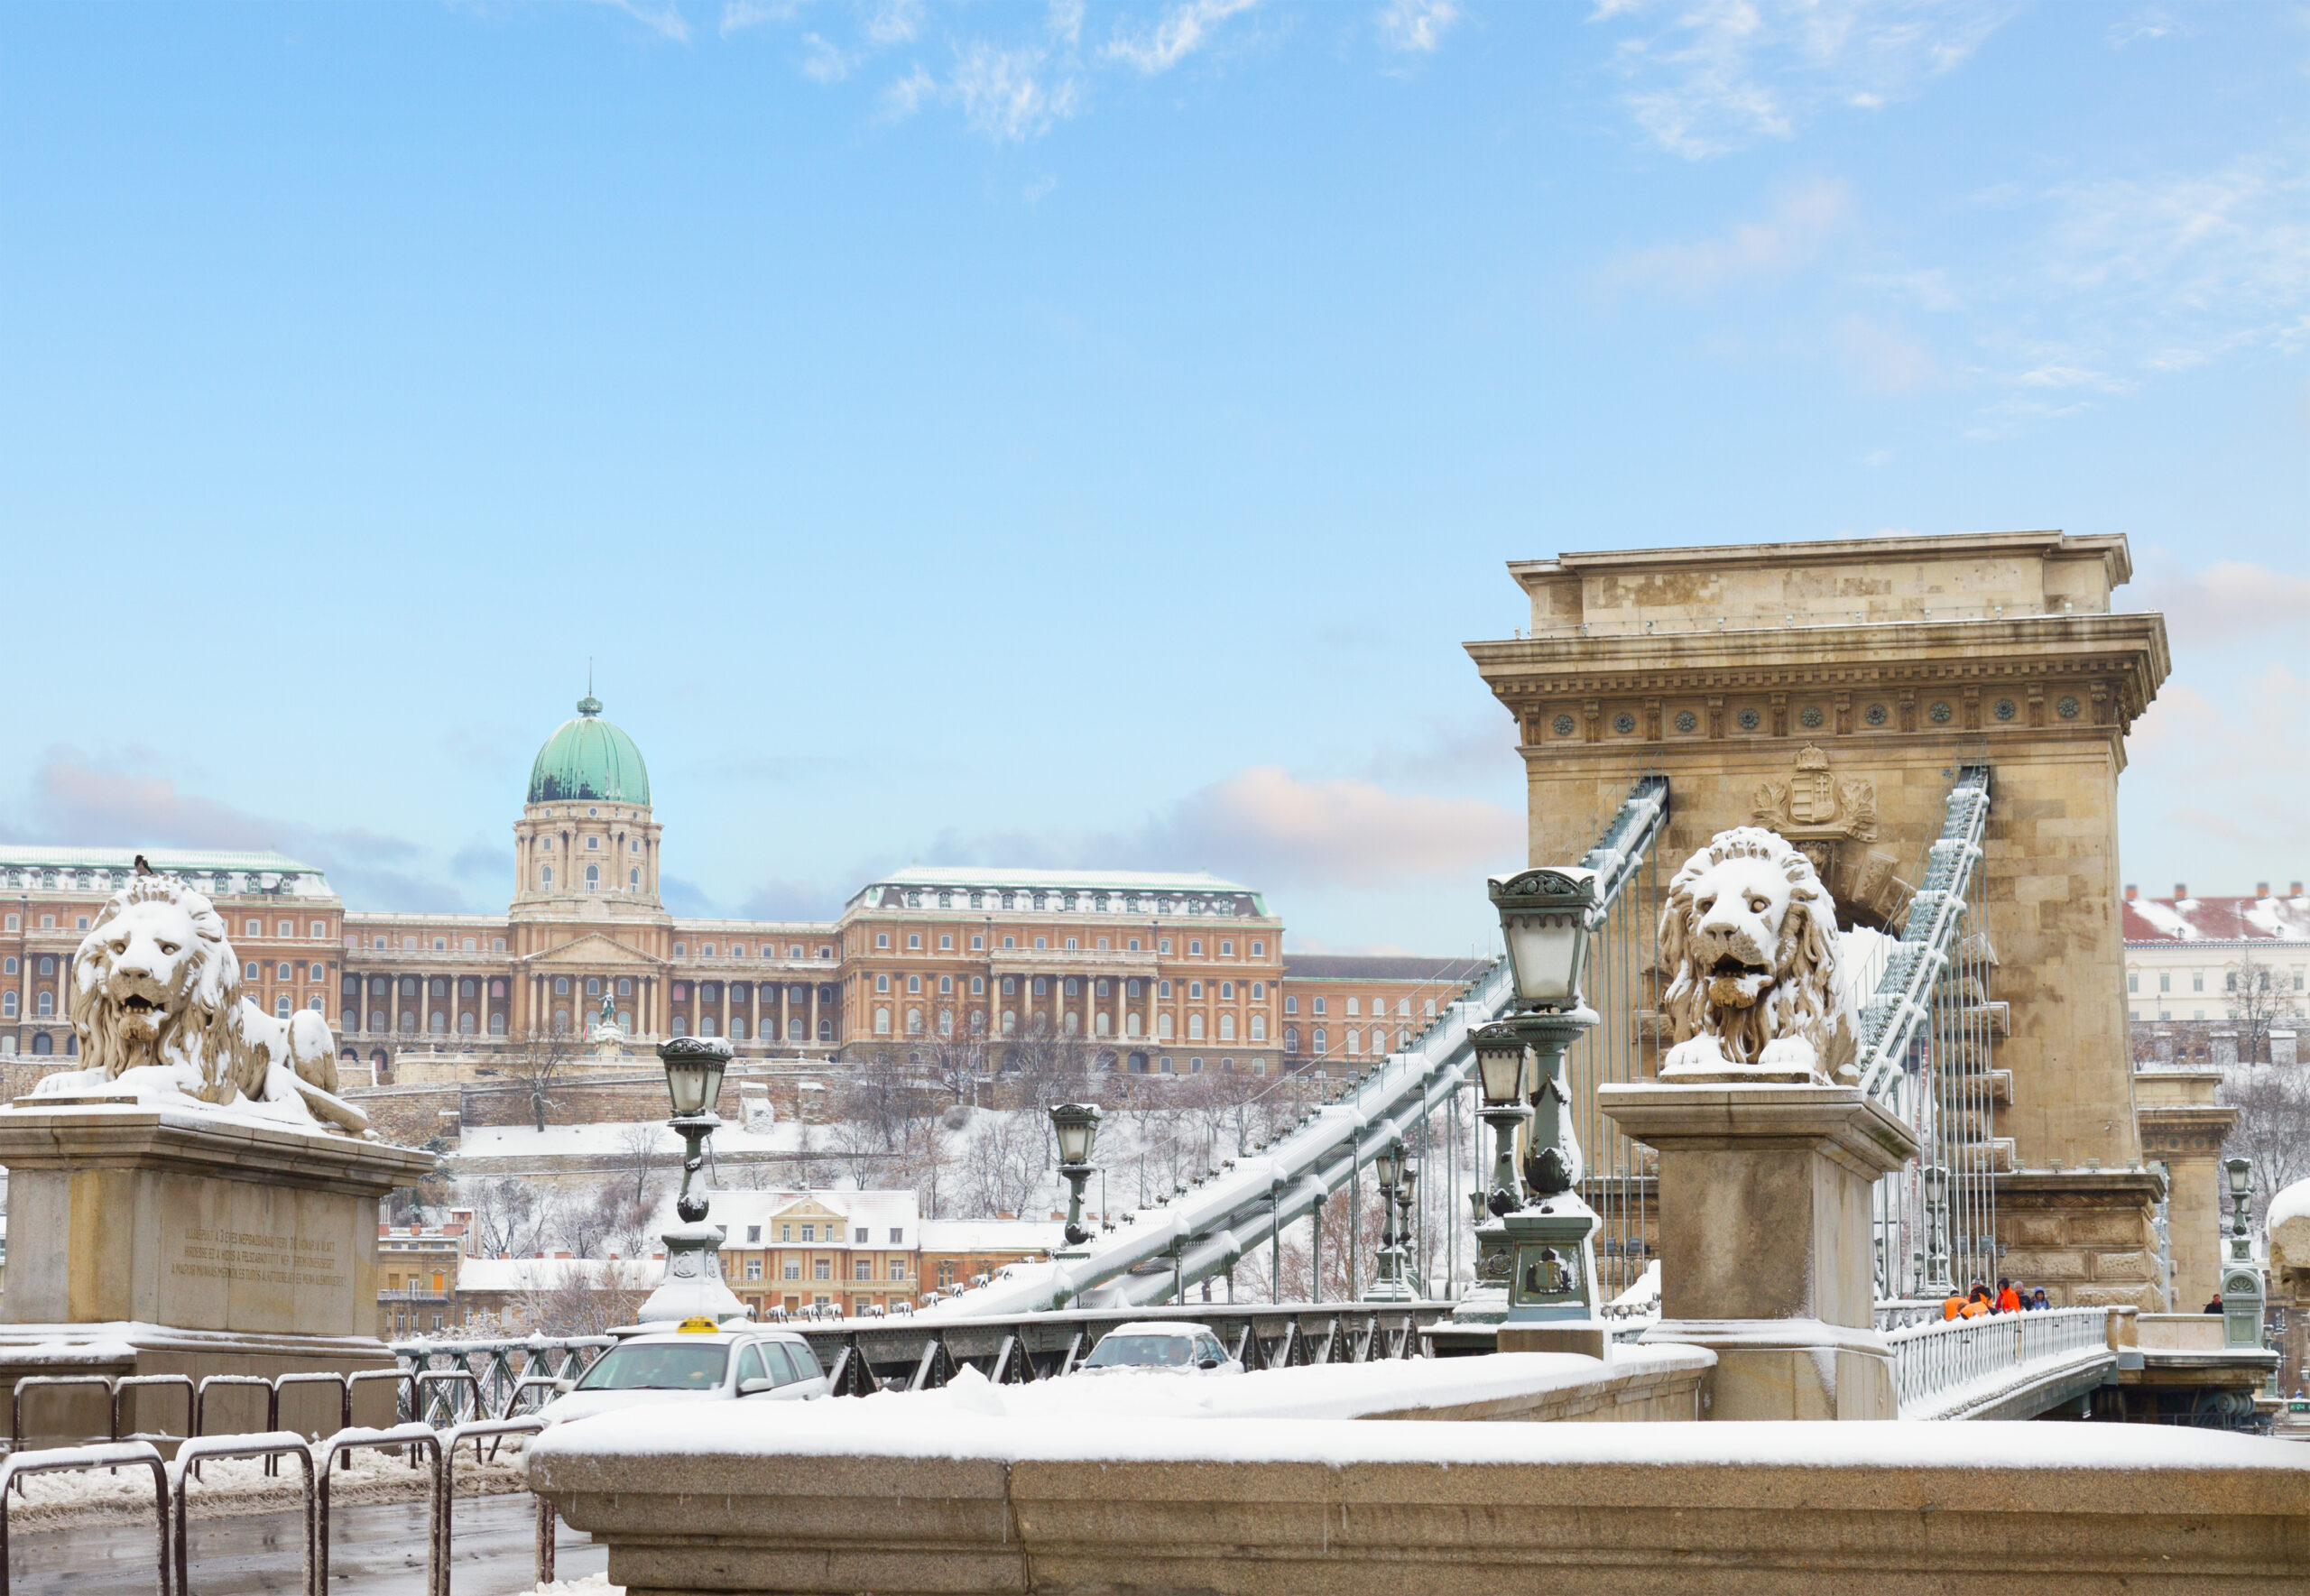 Beautiful photo of a dusting of snow on the bridge during winter in Budapest